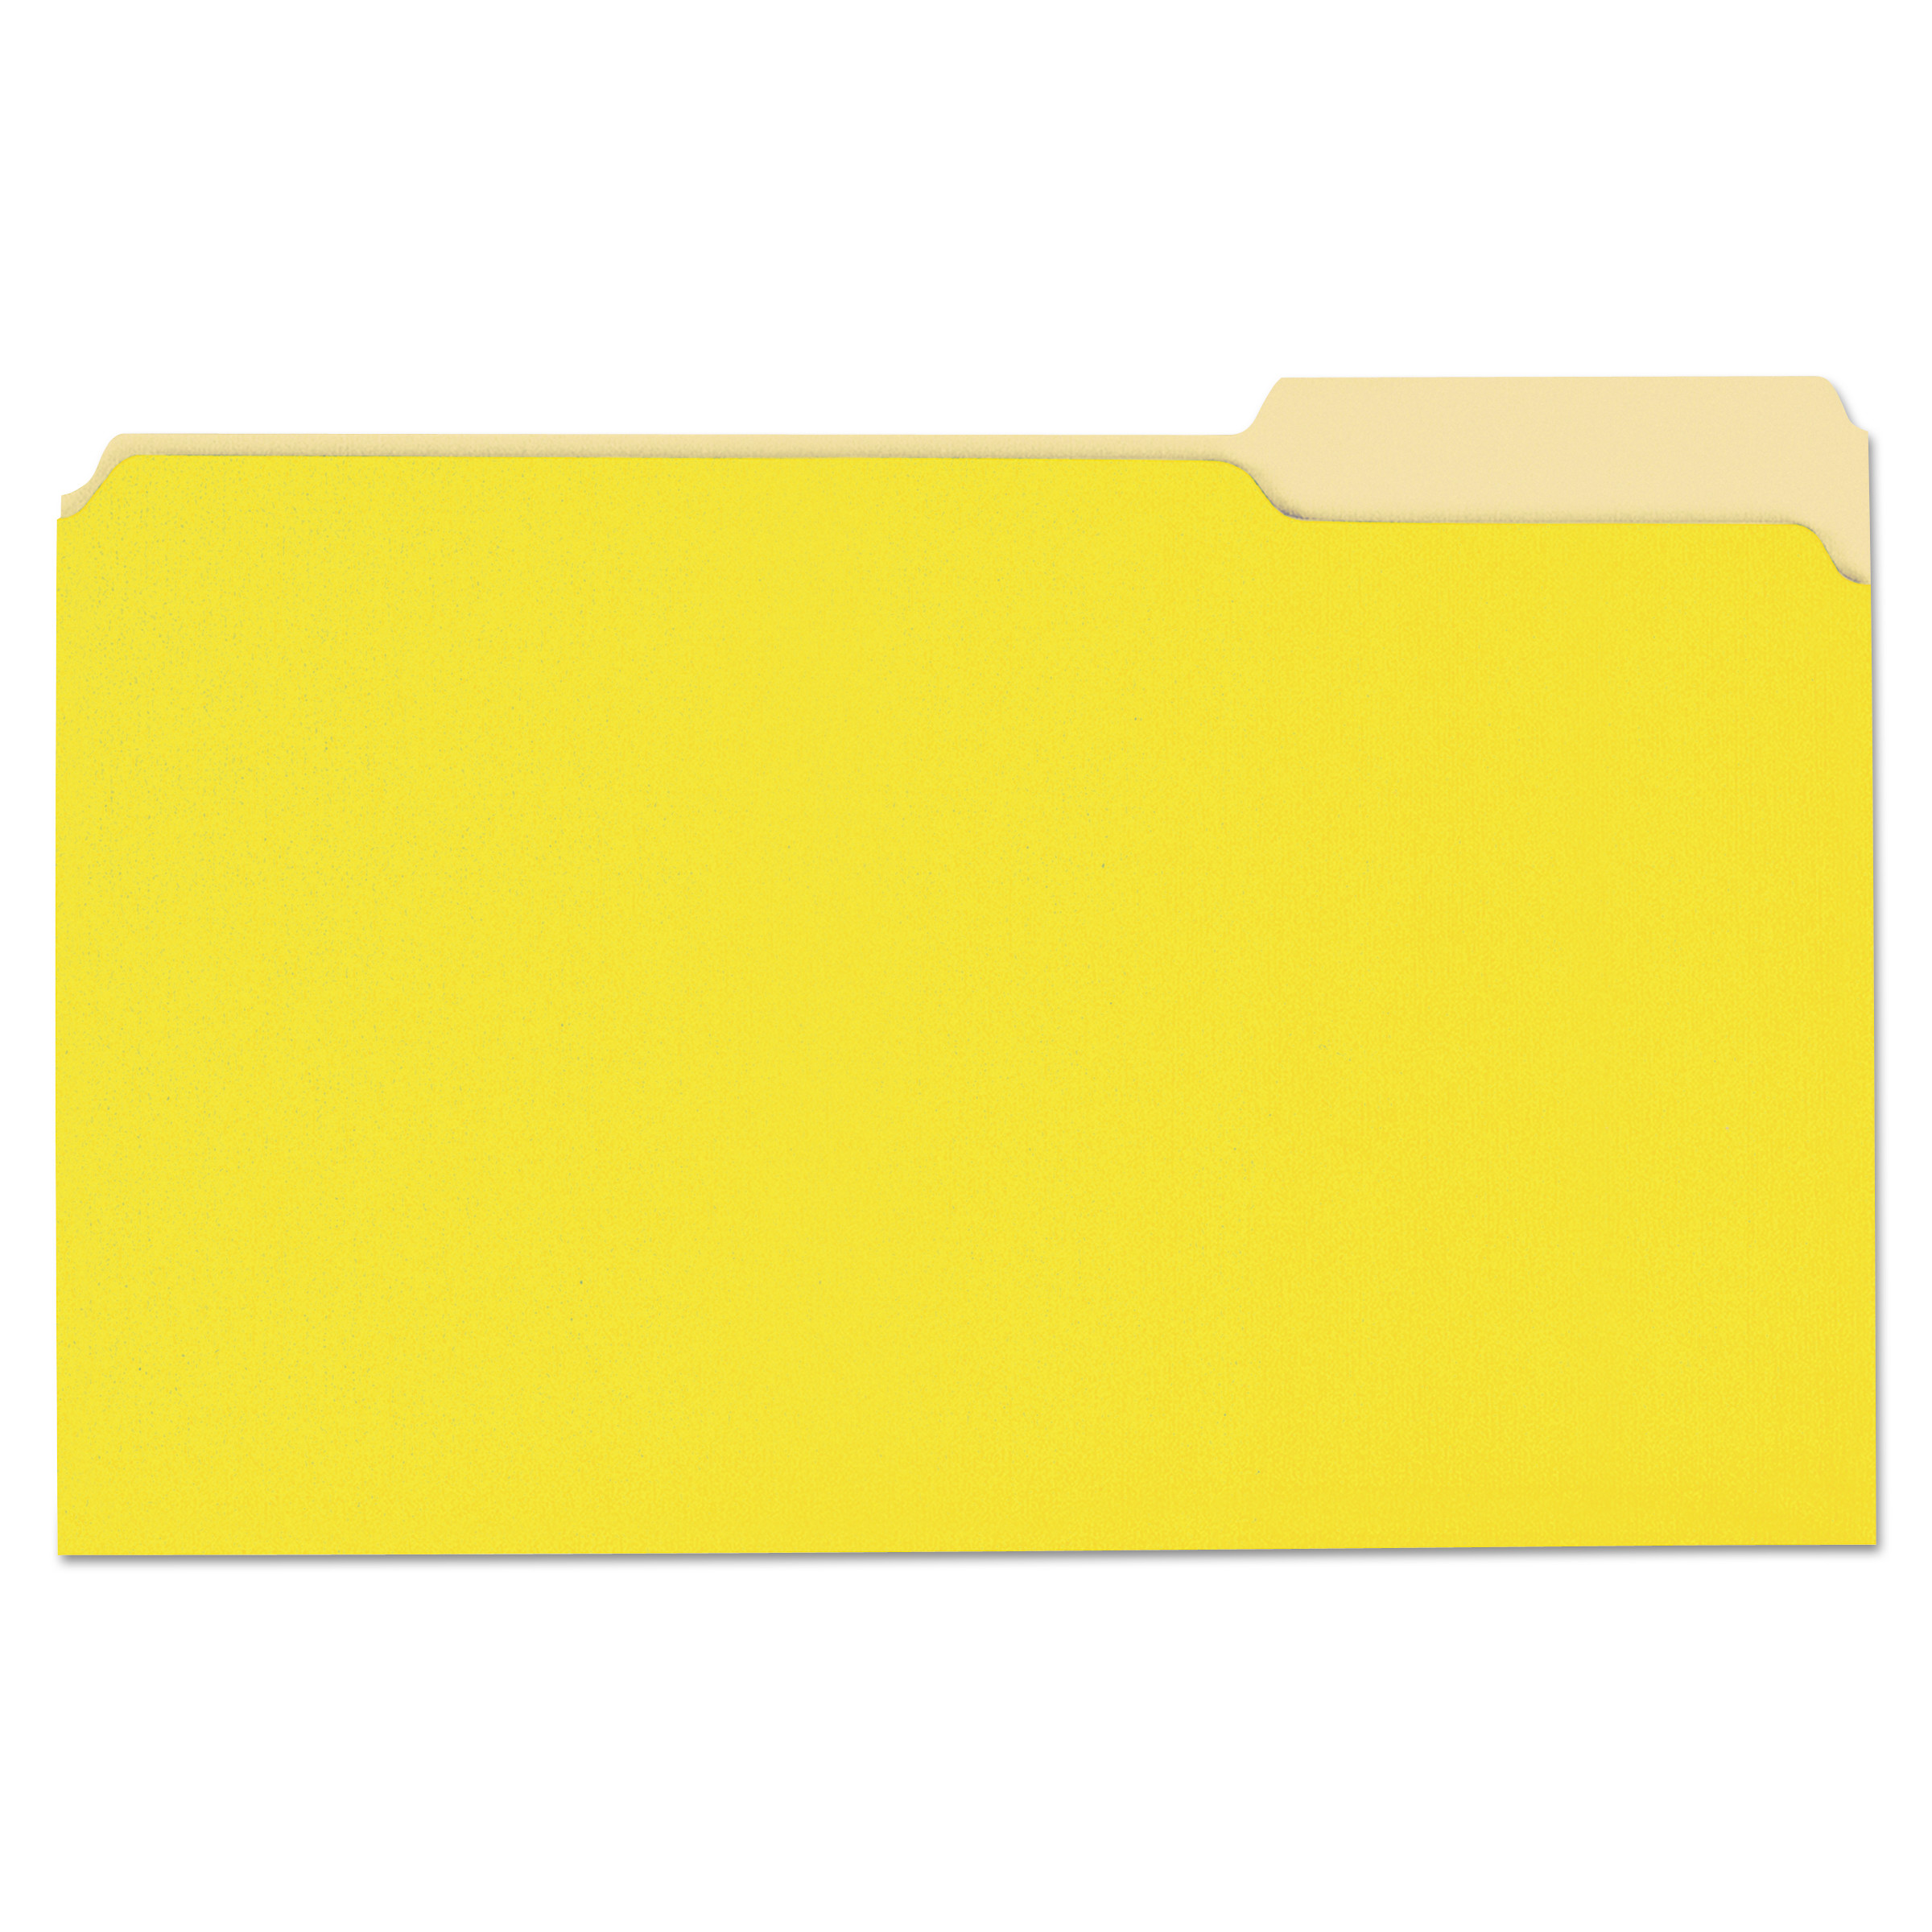  Universal UNV10524 Deluxe Colored Top Tab File Folders, 1/3-Cut Tabs, Legal Size, Yellowith Light Yellow, 100/Box (UNV10524) 